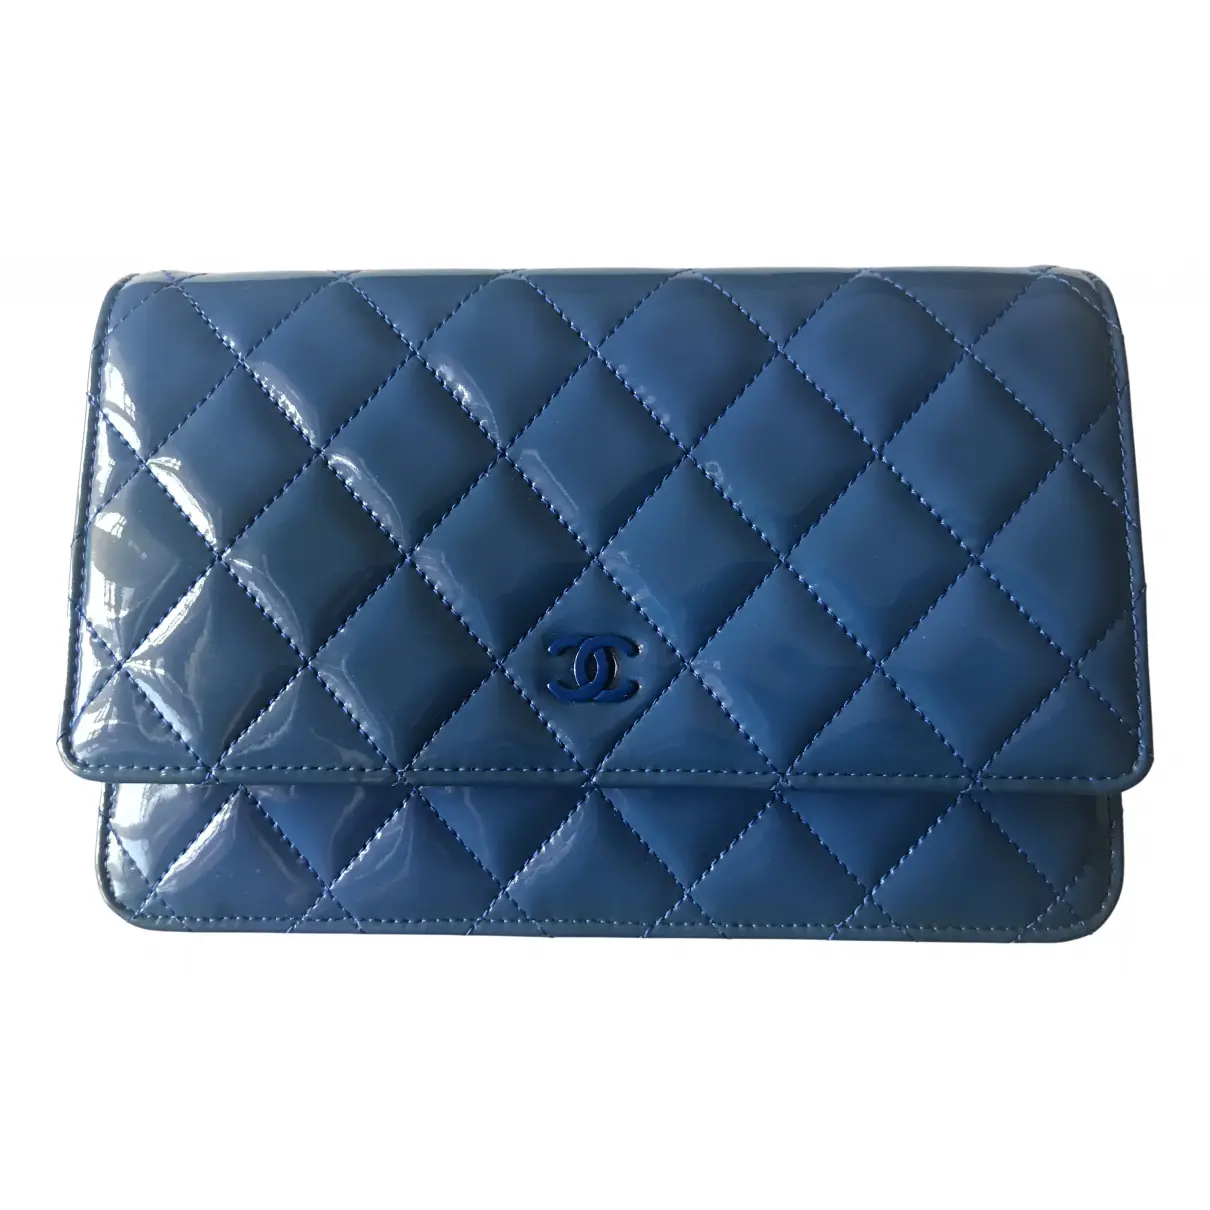 Wallet on Chain patent leather clutch bag Chanel